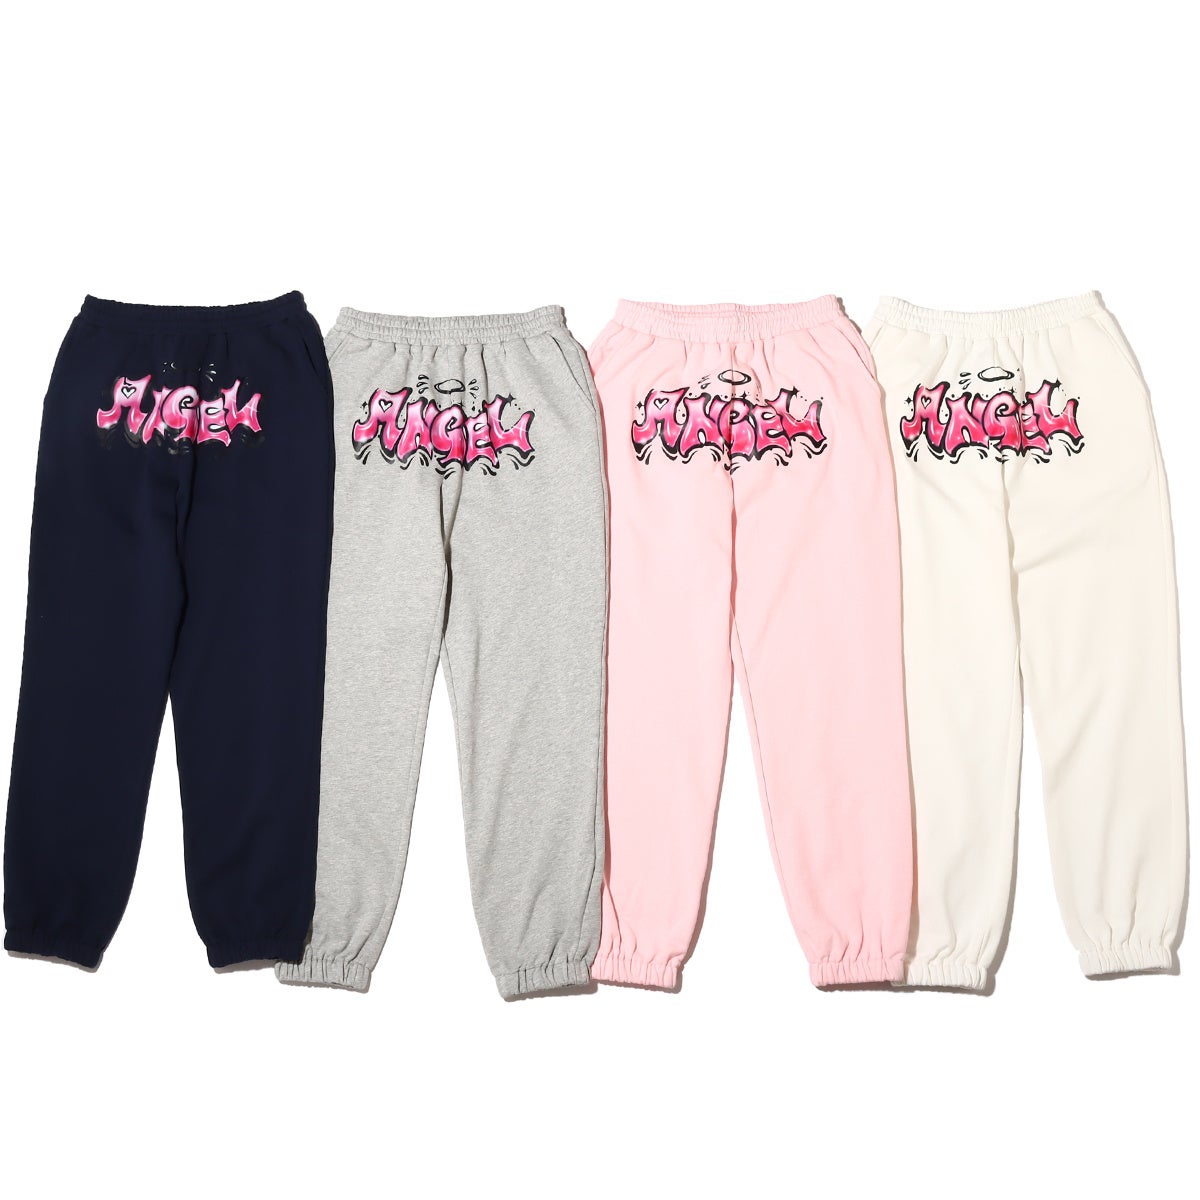 RIEHATA × atmos pink 22AW APPAREL COLLECTION 待望のコラボレーションアイテムが今季も登場！のサブ画像7